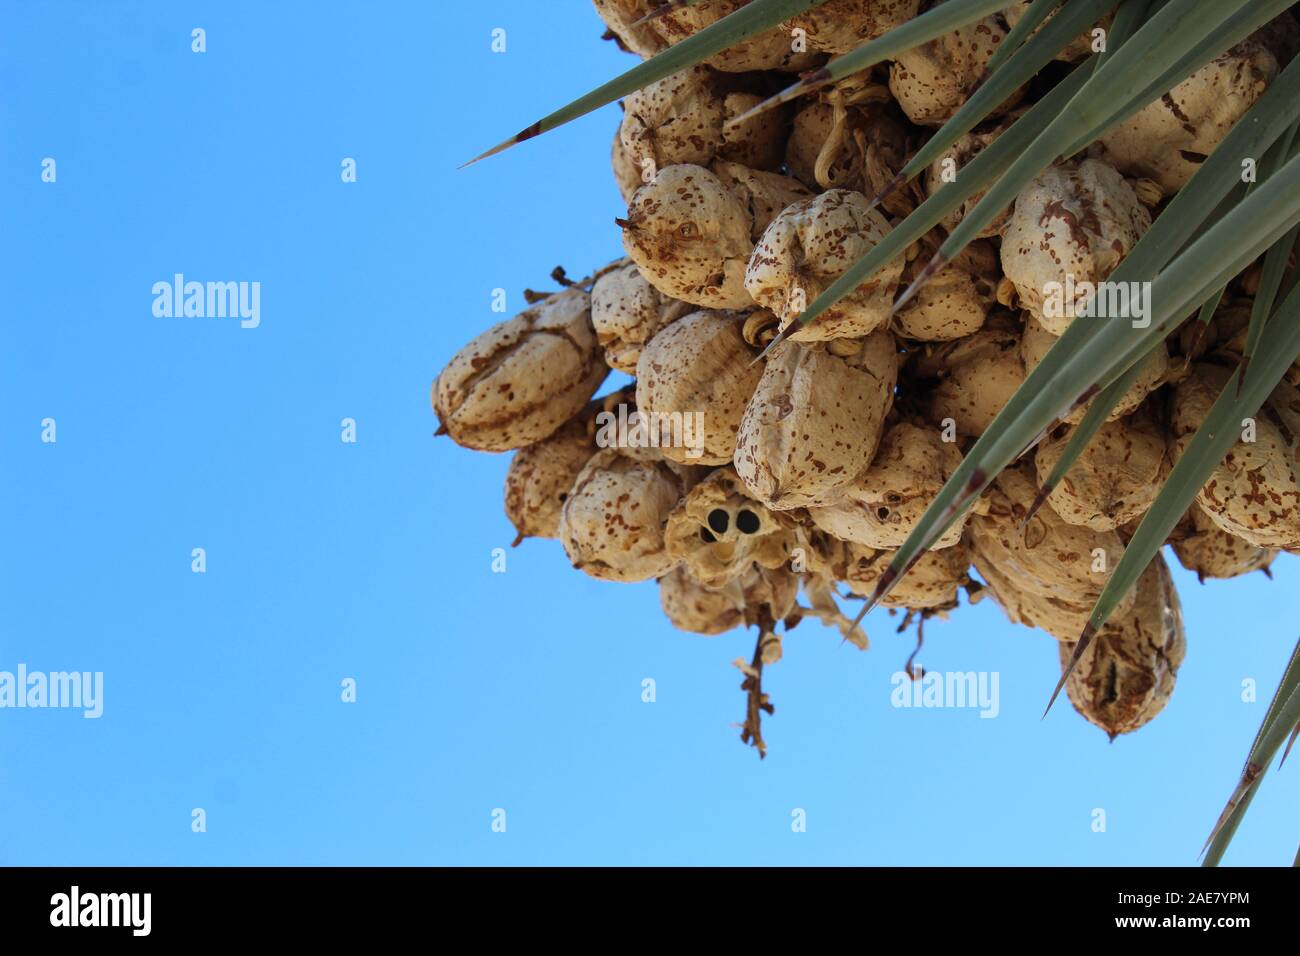 Until soread by small animals or wind, seeds of the Joshua Tree, Yucca Brevifolia, are stored in fruits, here, in the Southern Mojave Desert. Stock Photo